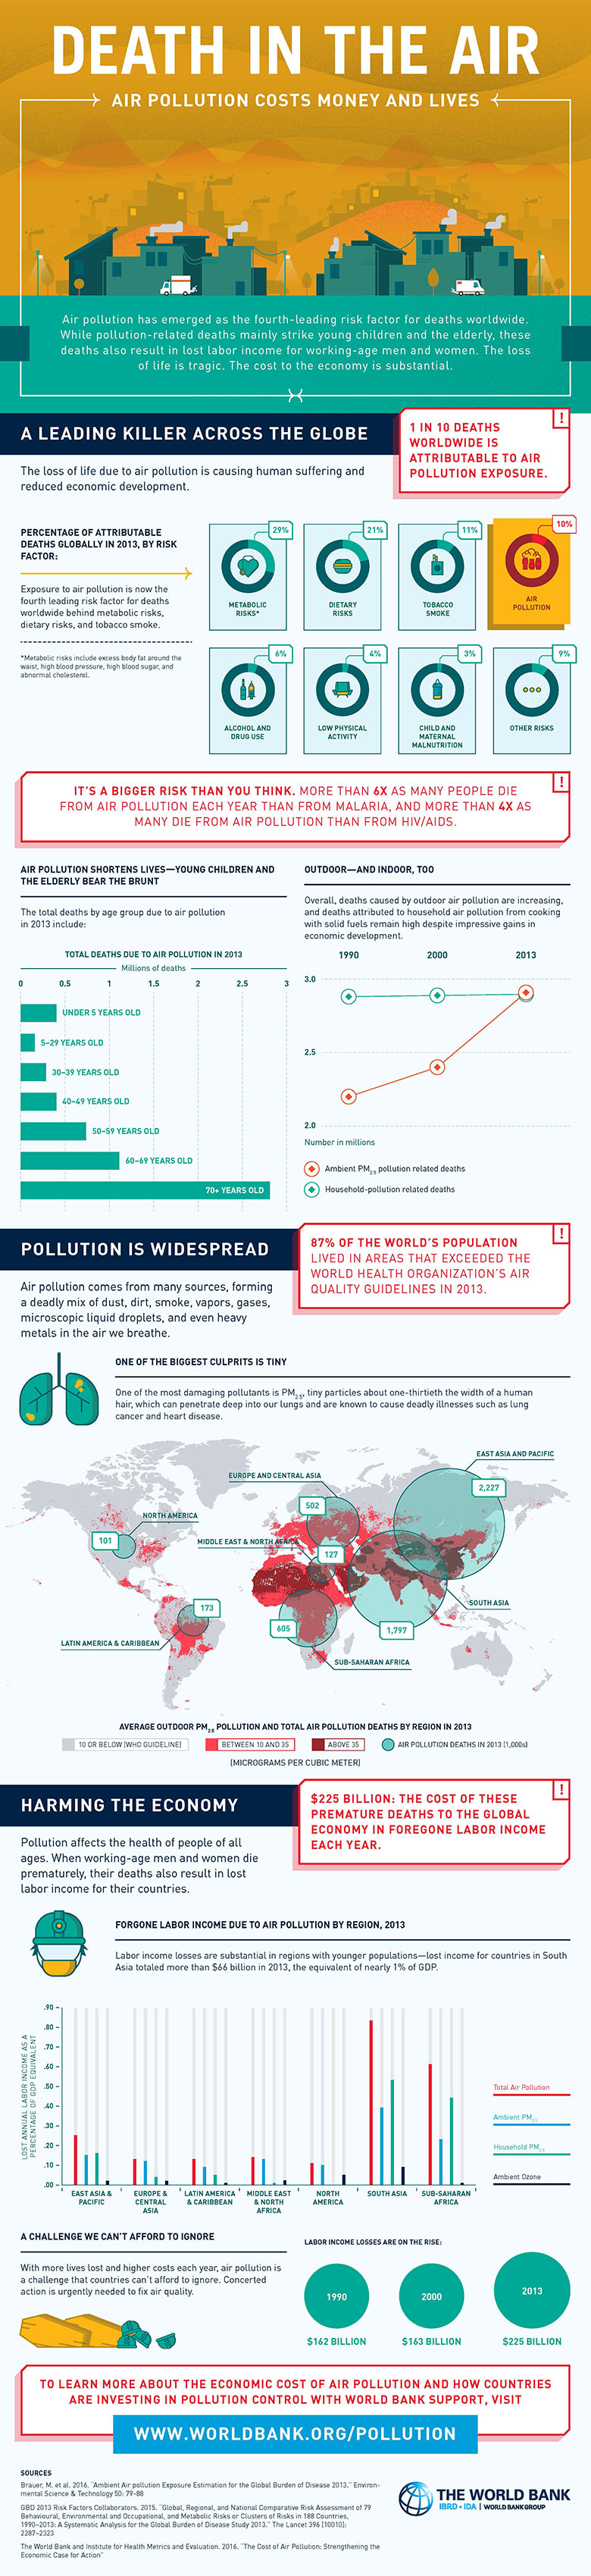 Death in the Air: Air Pollution Costs Money and Lives (Image: World Bank)